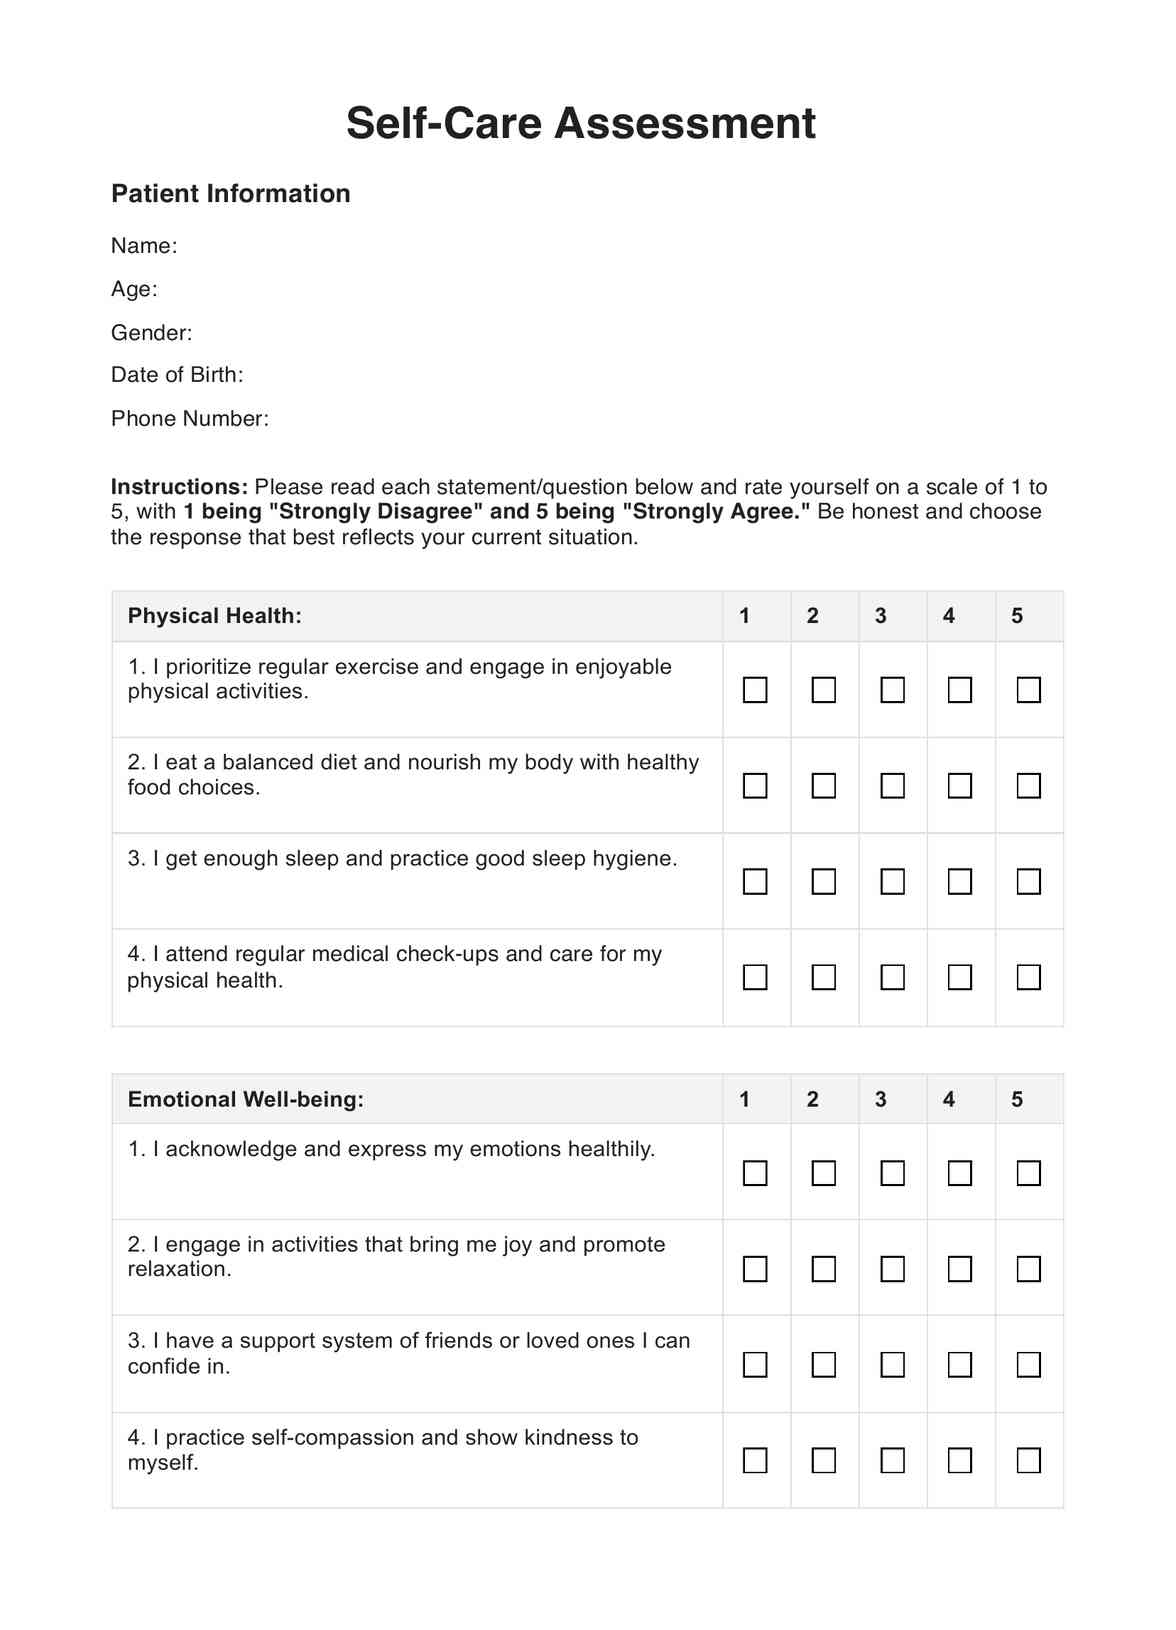 Self-Care Assessment PDF Example